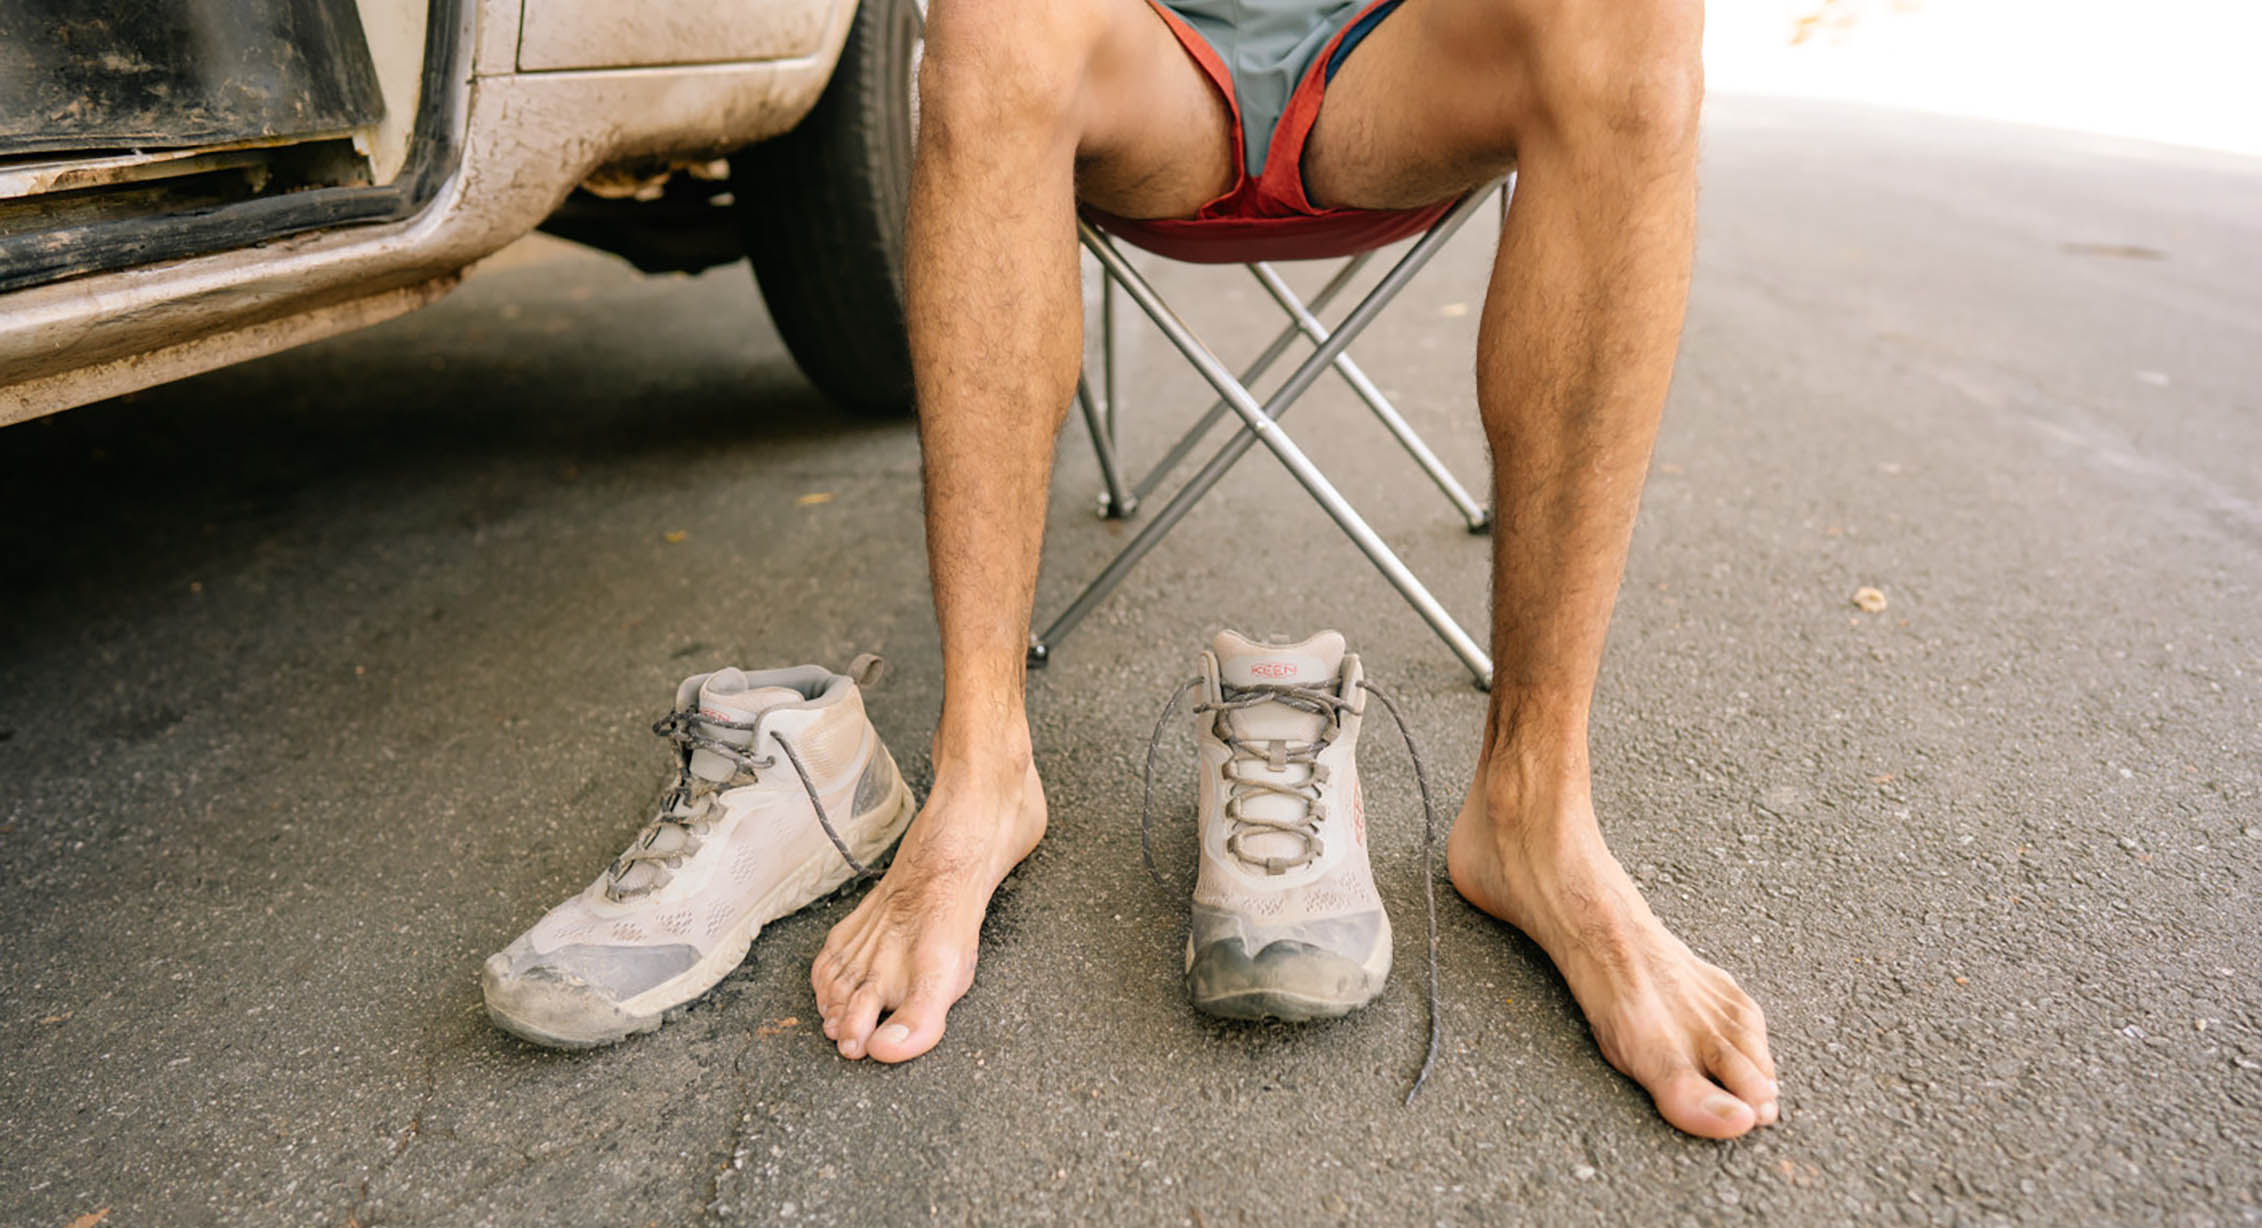 a pair of bare feet relax next to a pair of NXIS hiking shoes